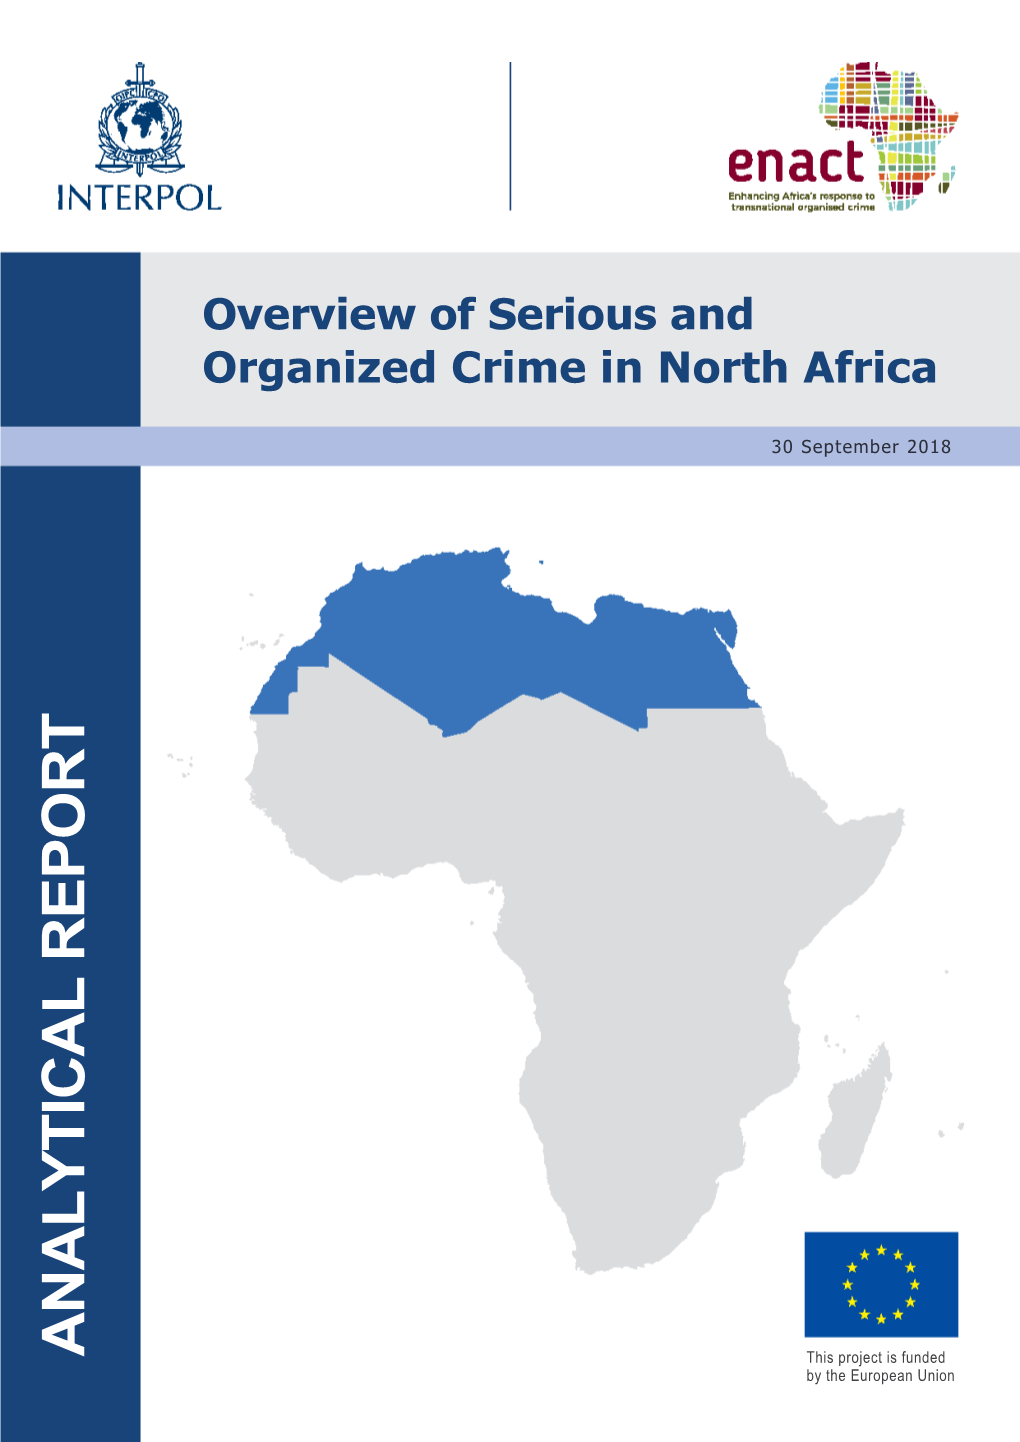 Overview of Serious and Organized Crime in North Africa